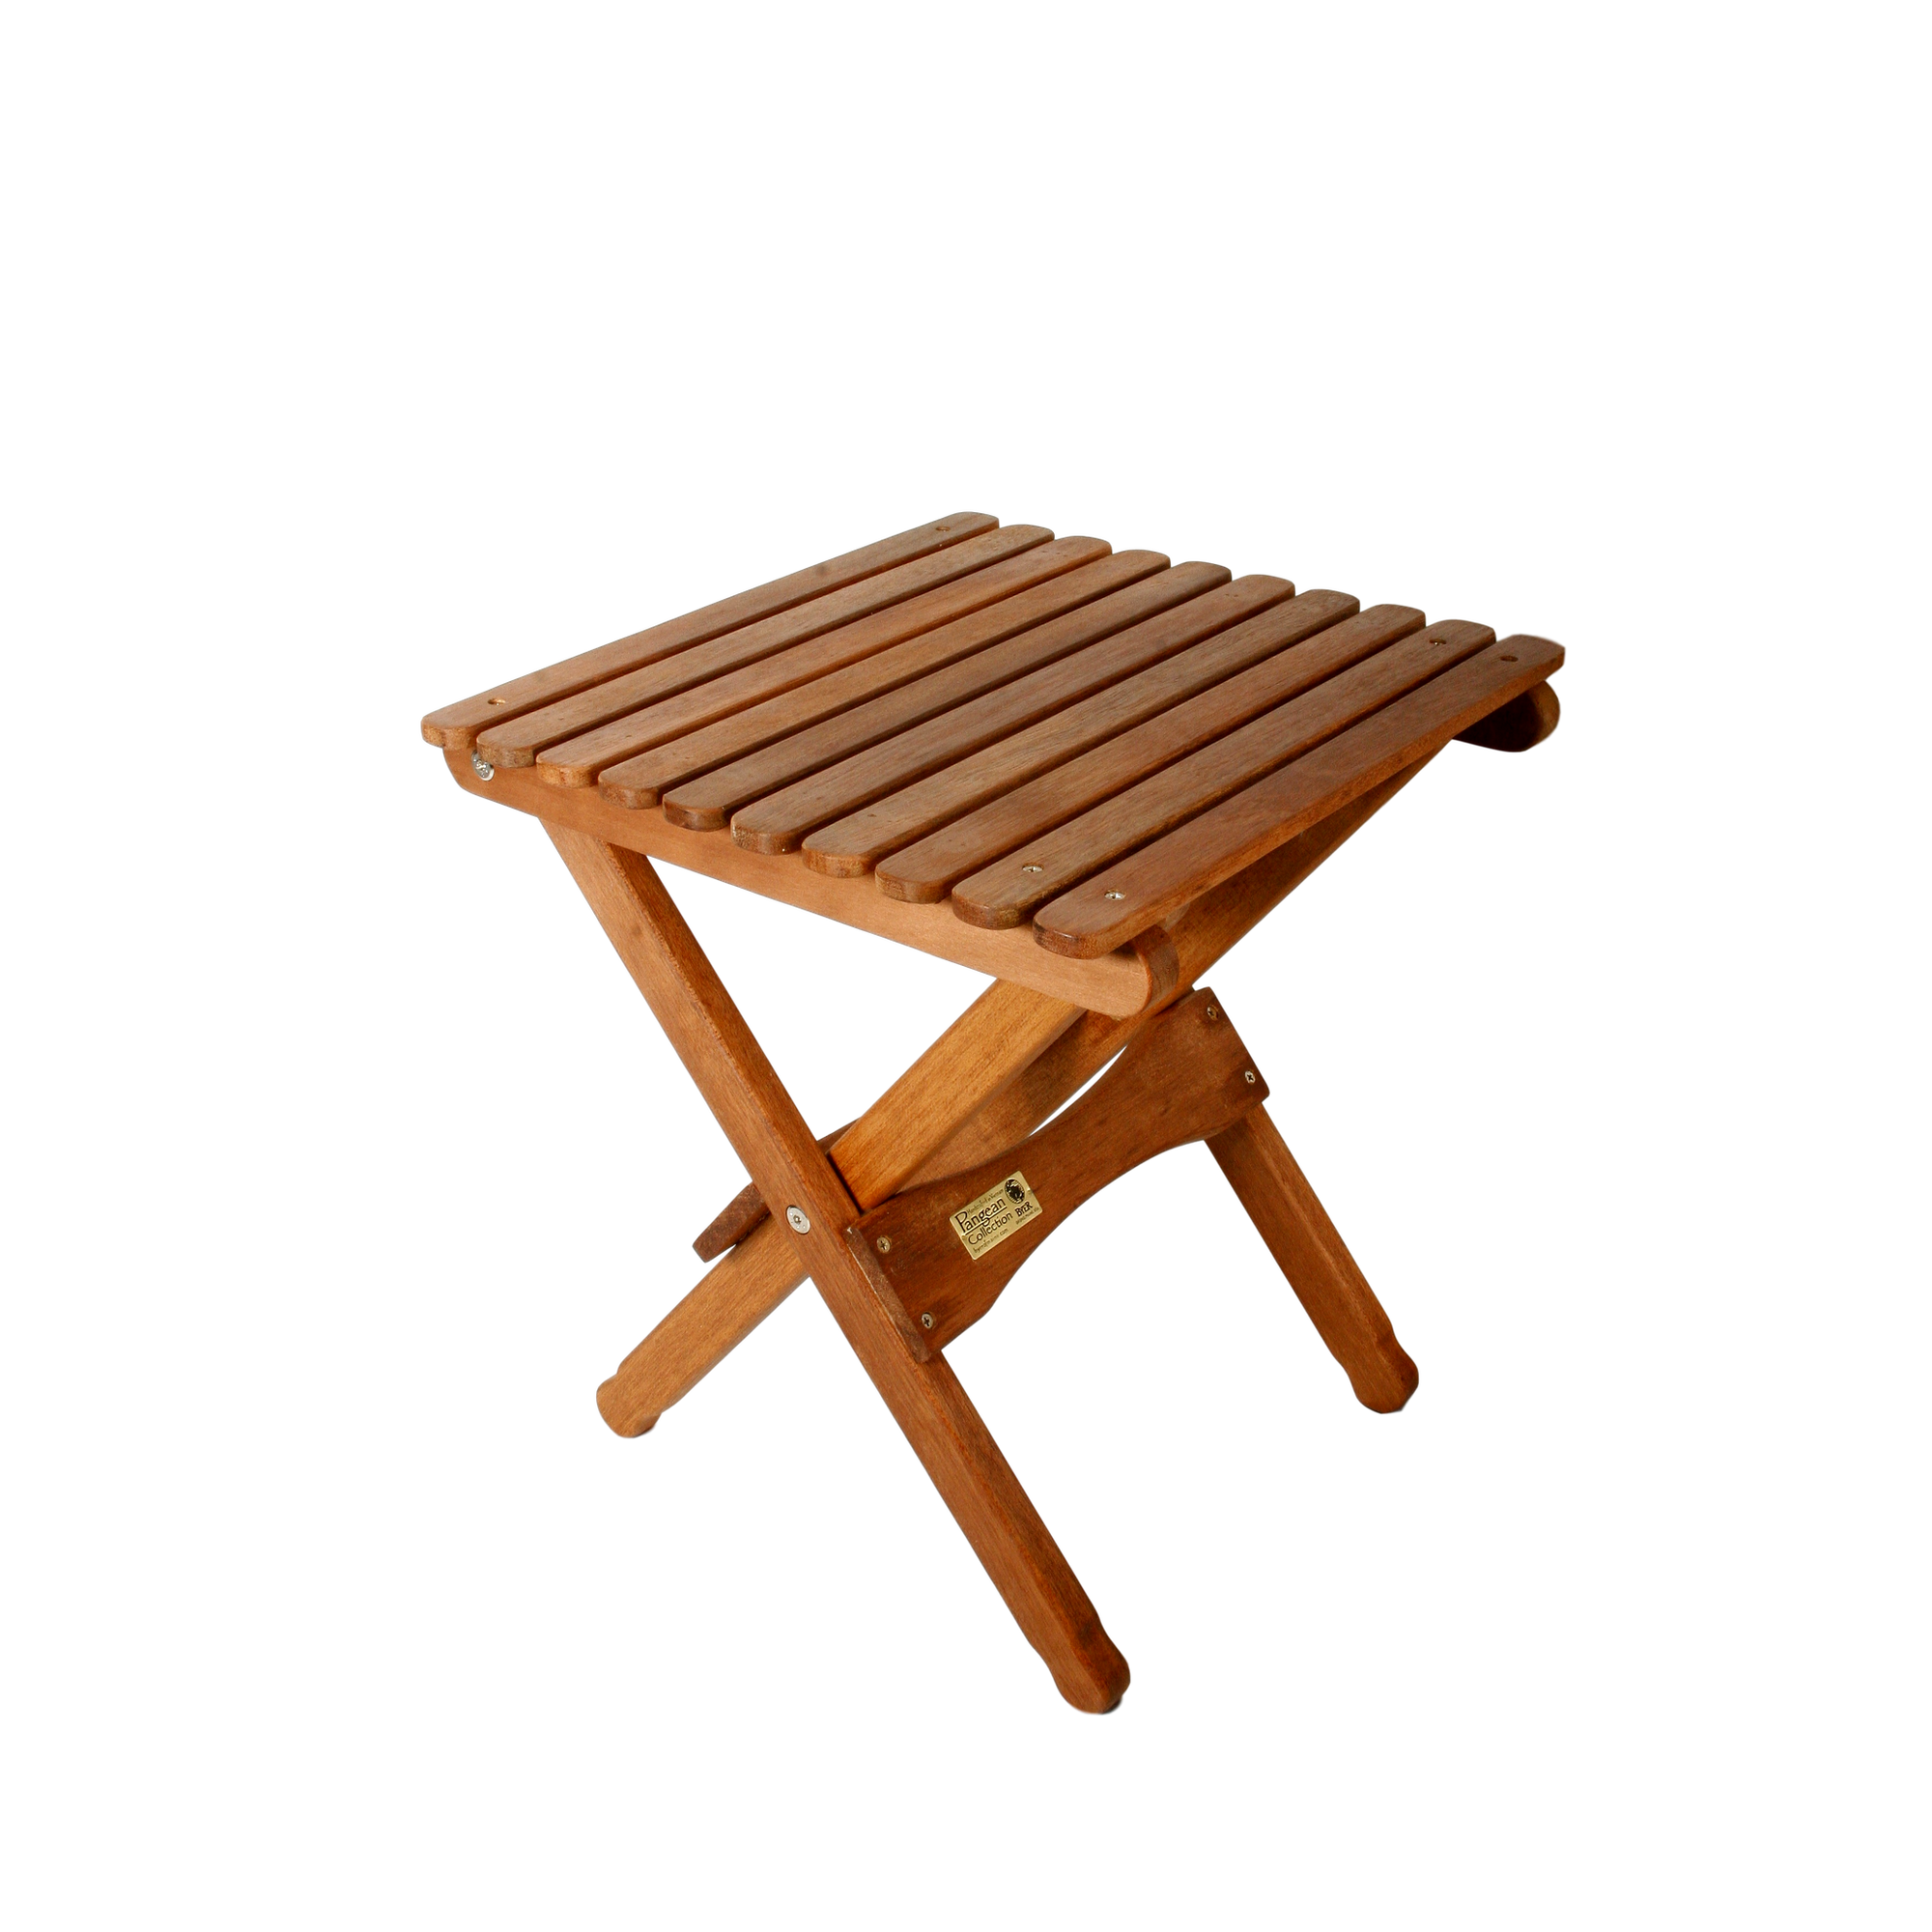 Pangean Folding Table, from Byer of Maine